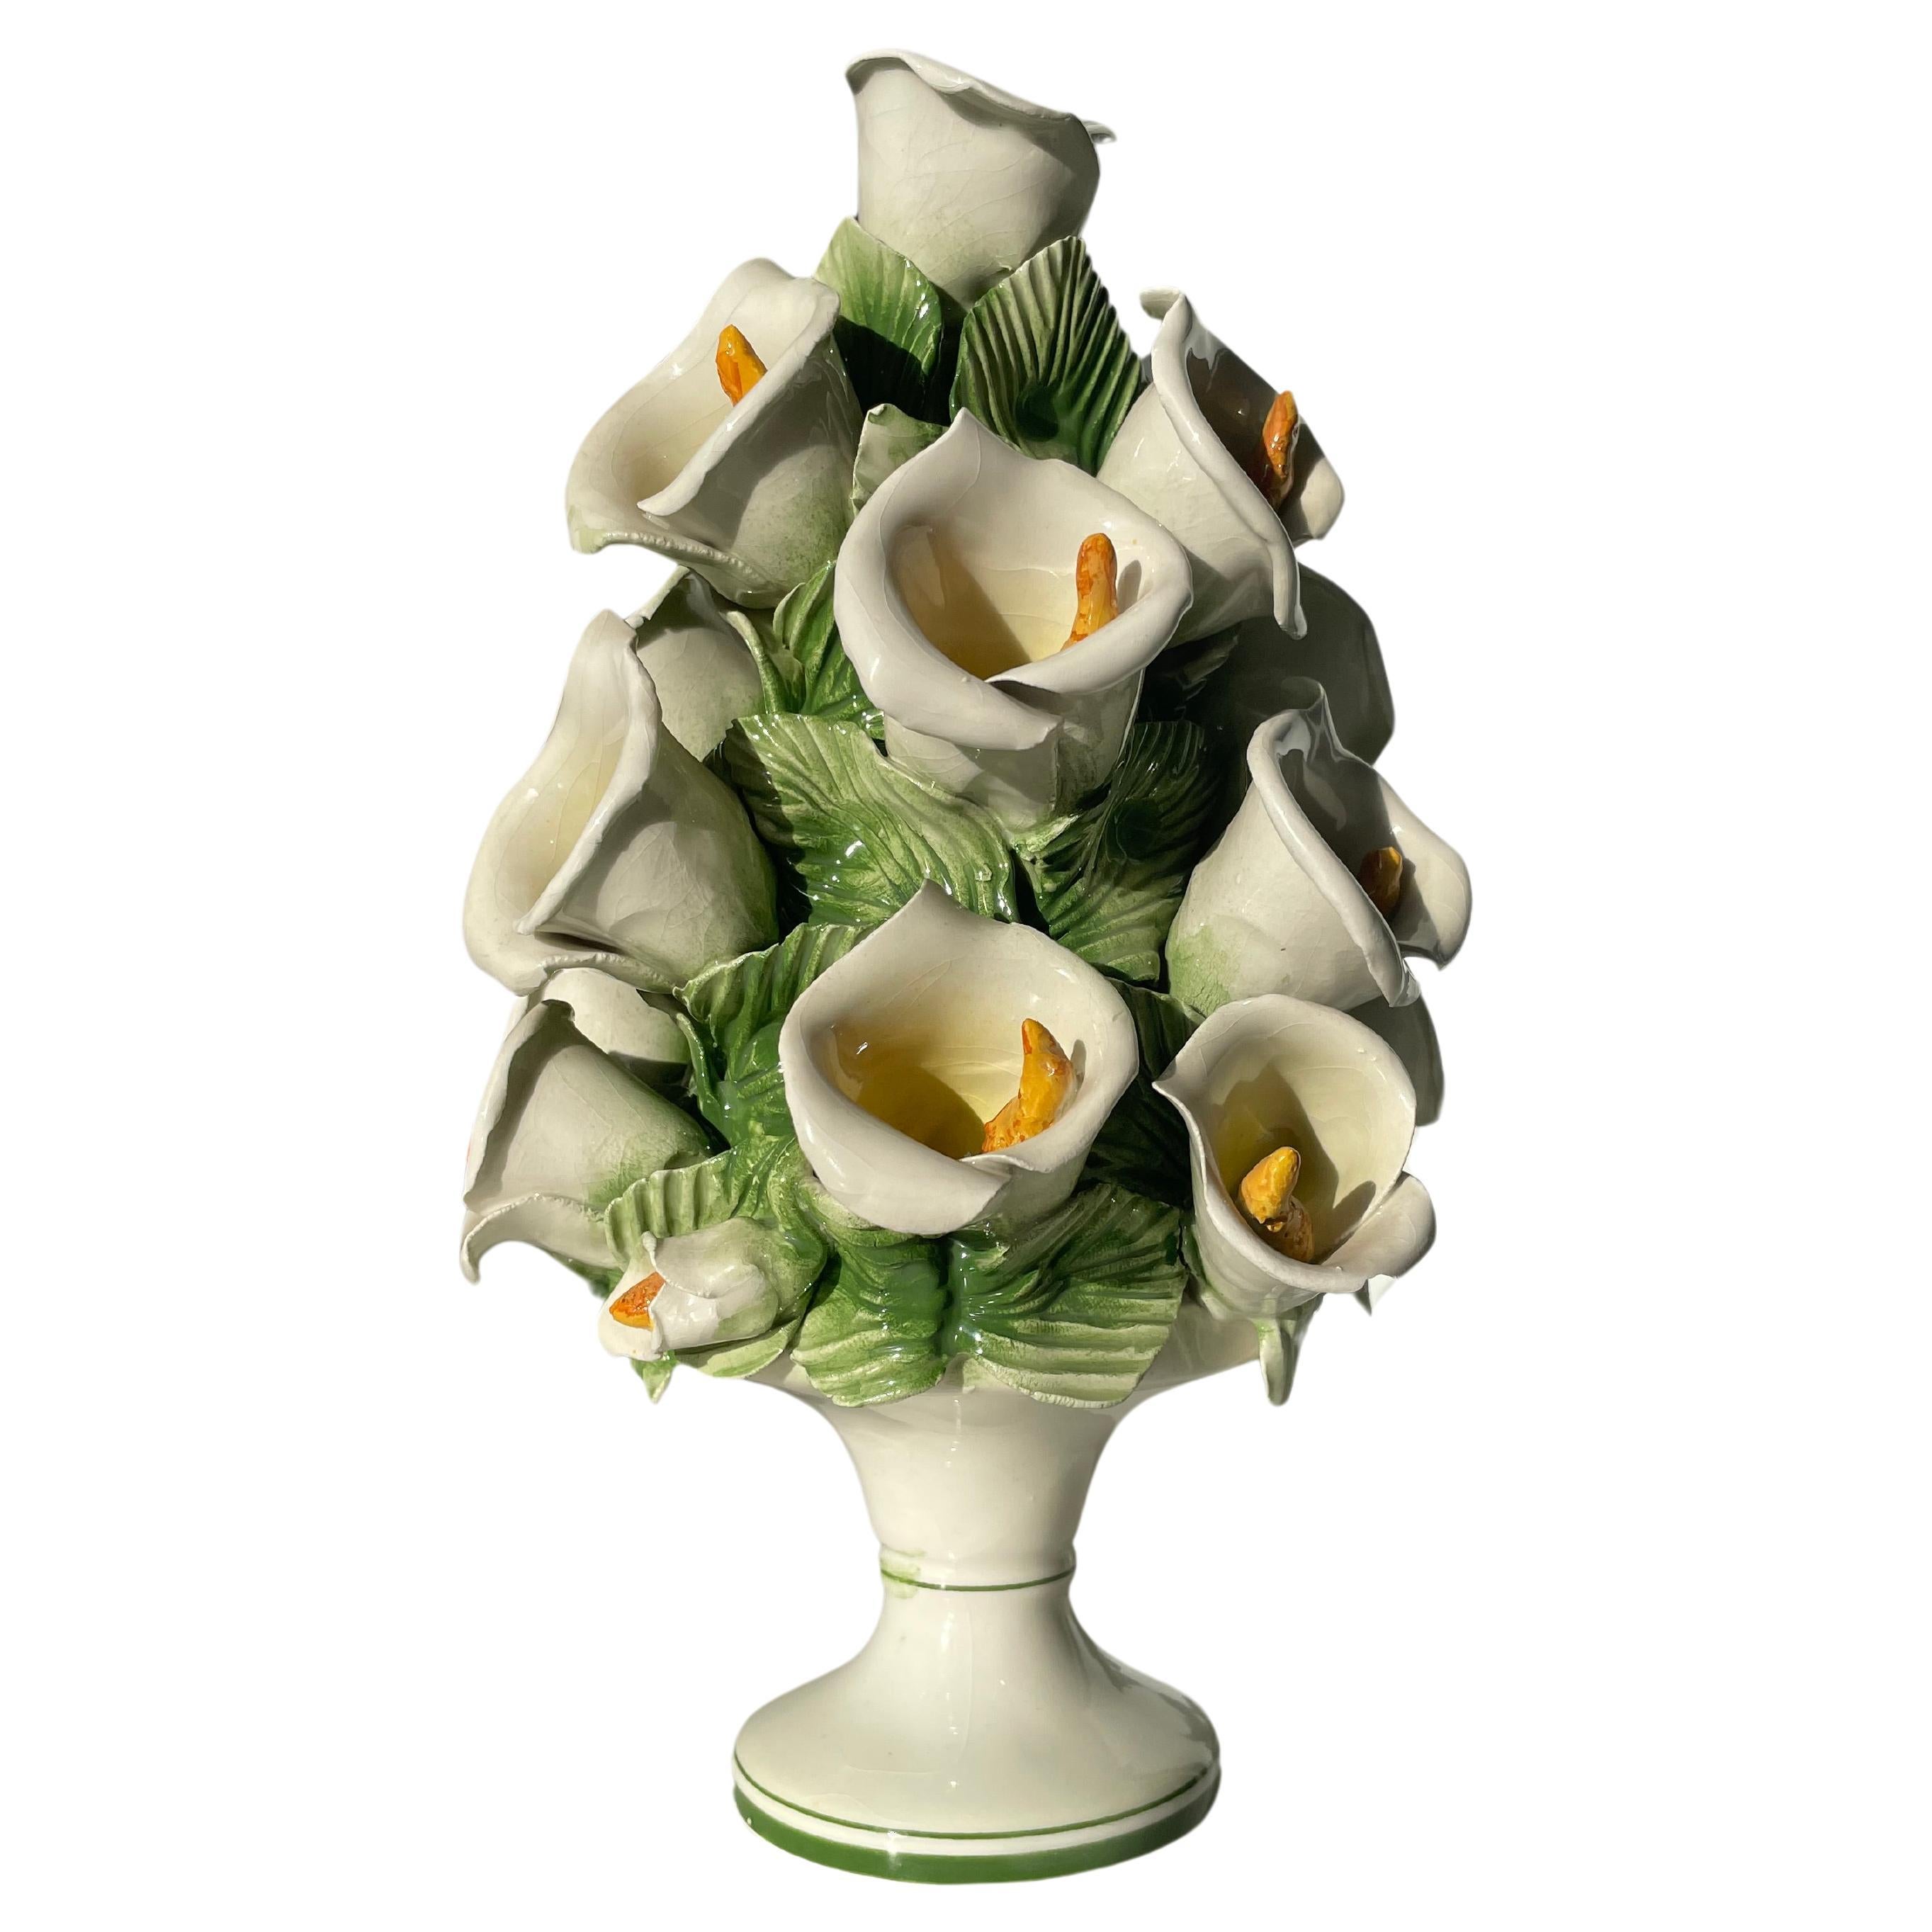 Vintage Italian delicately hand-crafted sculptural organic floral regency style porcelain figurine. Multiple large naturalistic white and yellow cala lilies in different stages of bloom surrounded by green leaves placed in a pyramid shaped